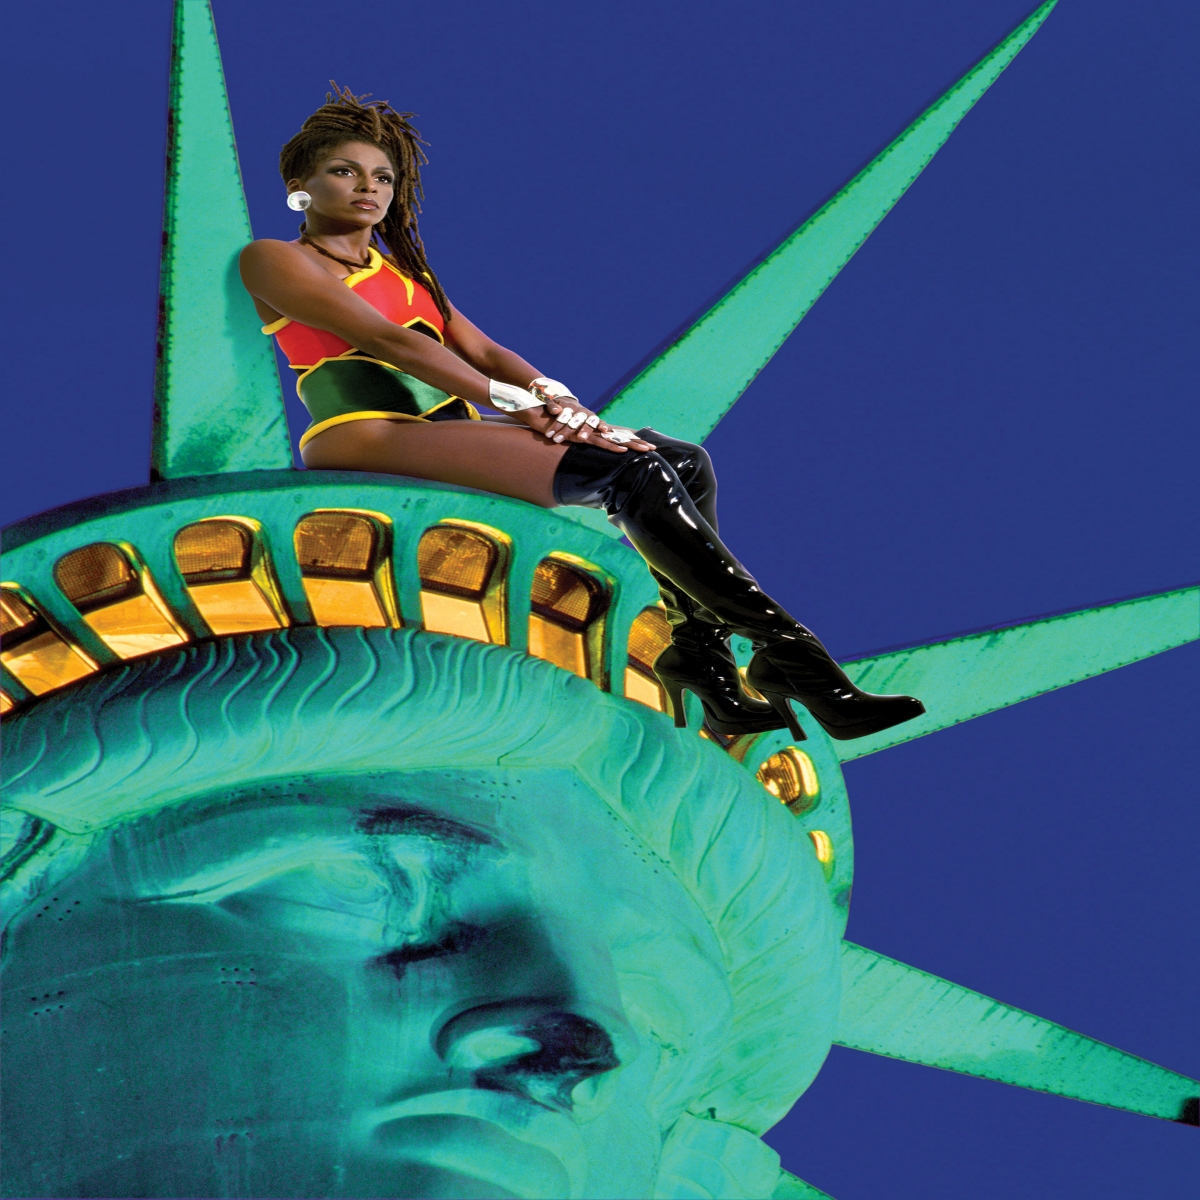 Chillin’ with Lady Liberty, Renee Cox, 1998. Courtesy Renee Cox